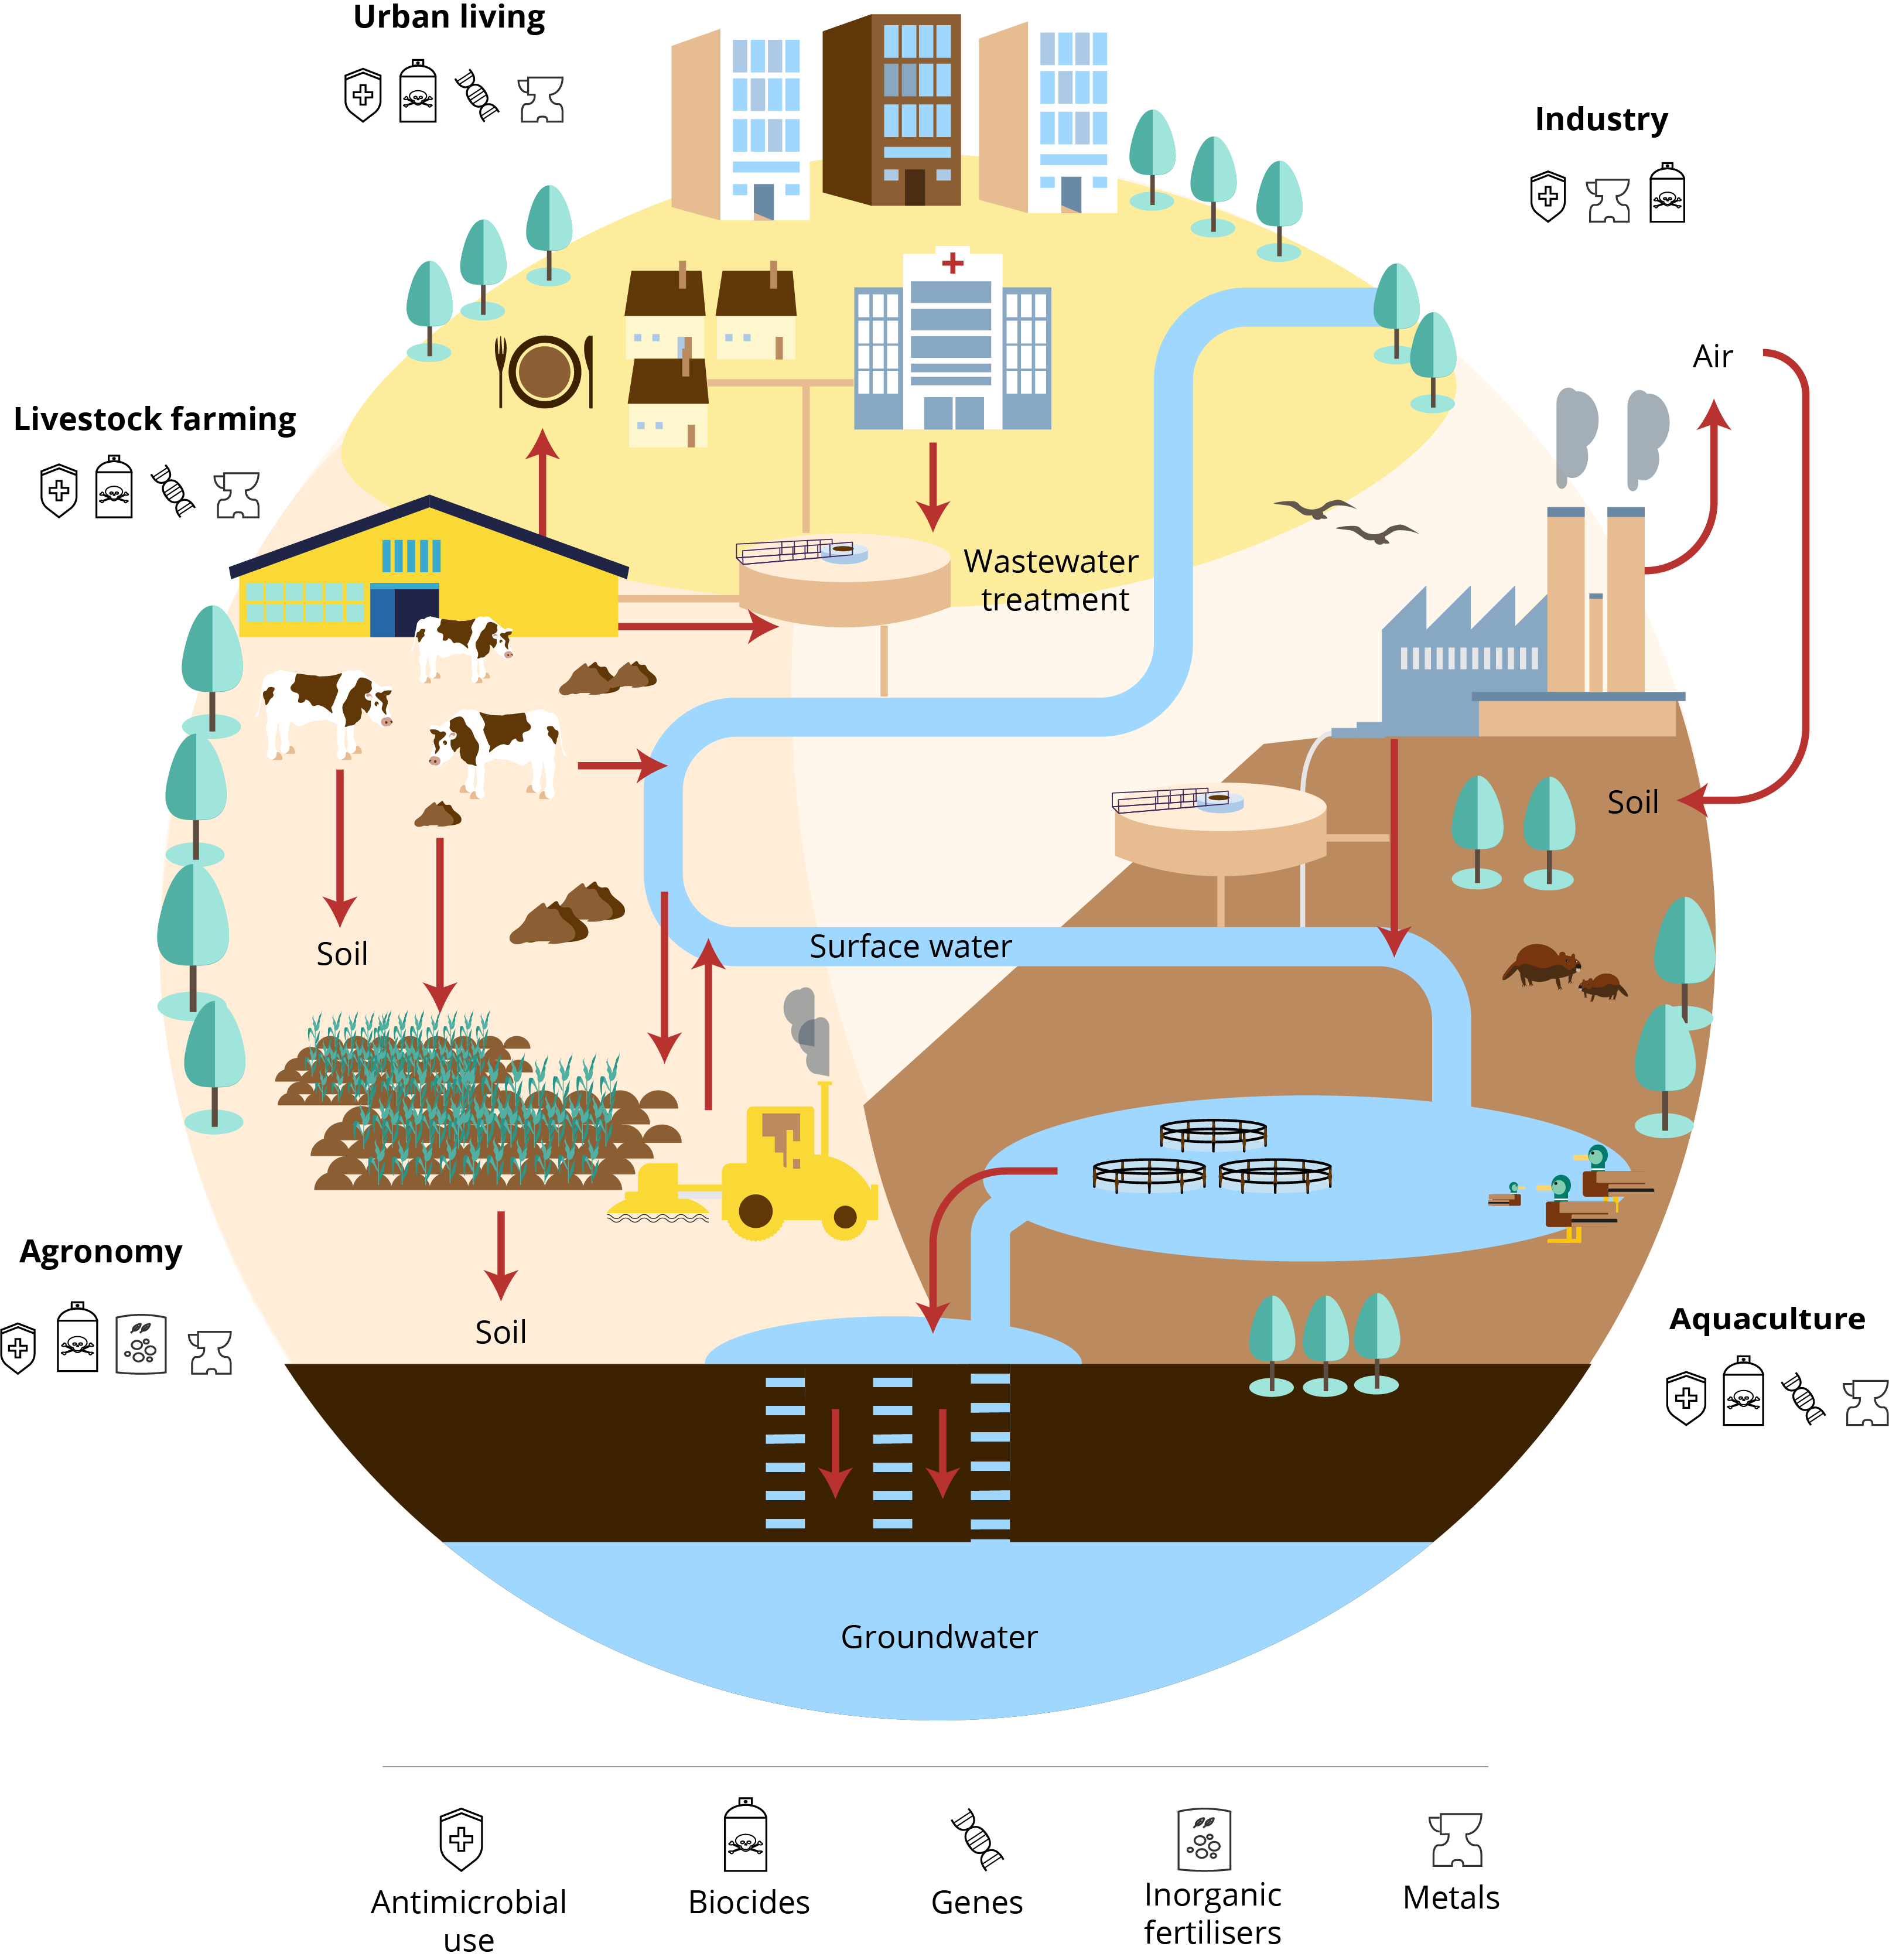 Figure 1. Overview of human activities producing AMR and main AMR pathways in aquatic environmental compartments